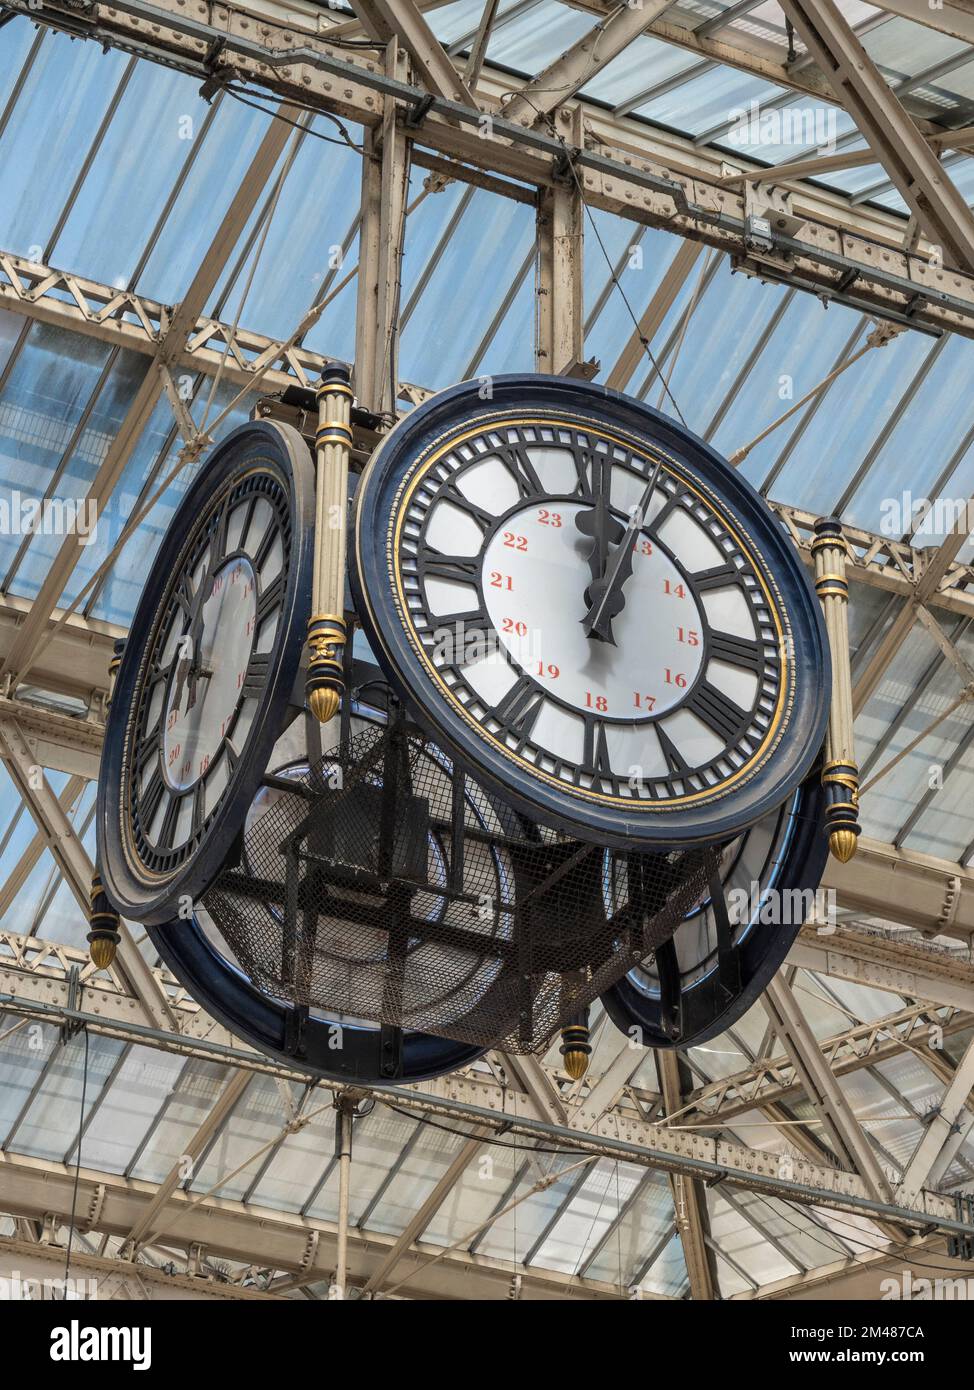 the famous  four-sided hanging clock in Waterloo mainline station, London which is a major meeting point UK. Stock Photo